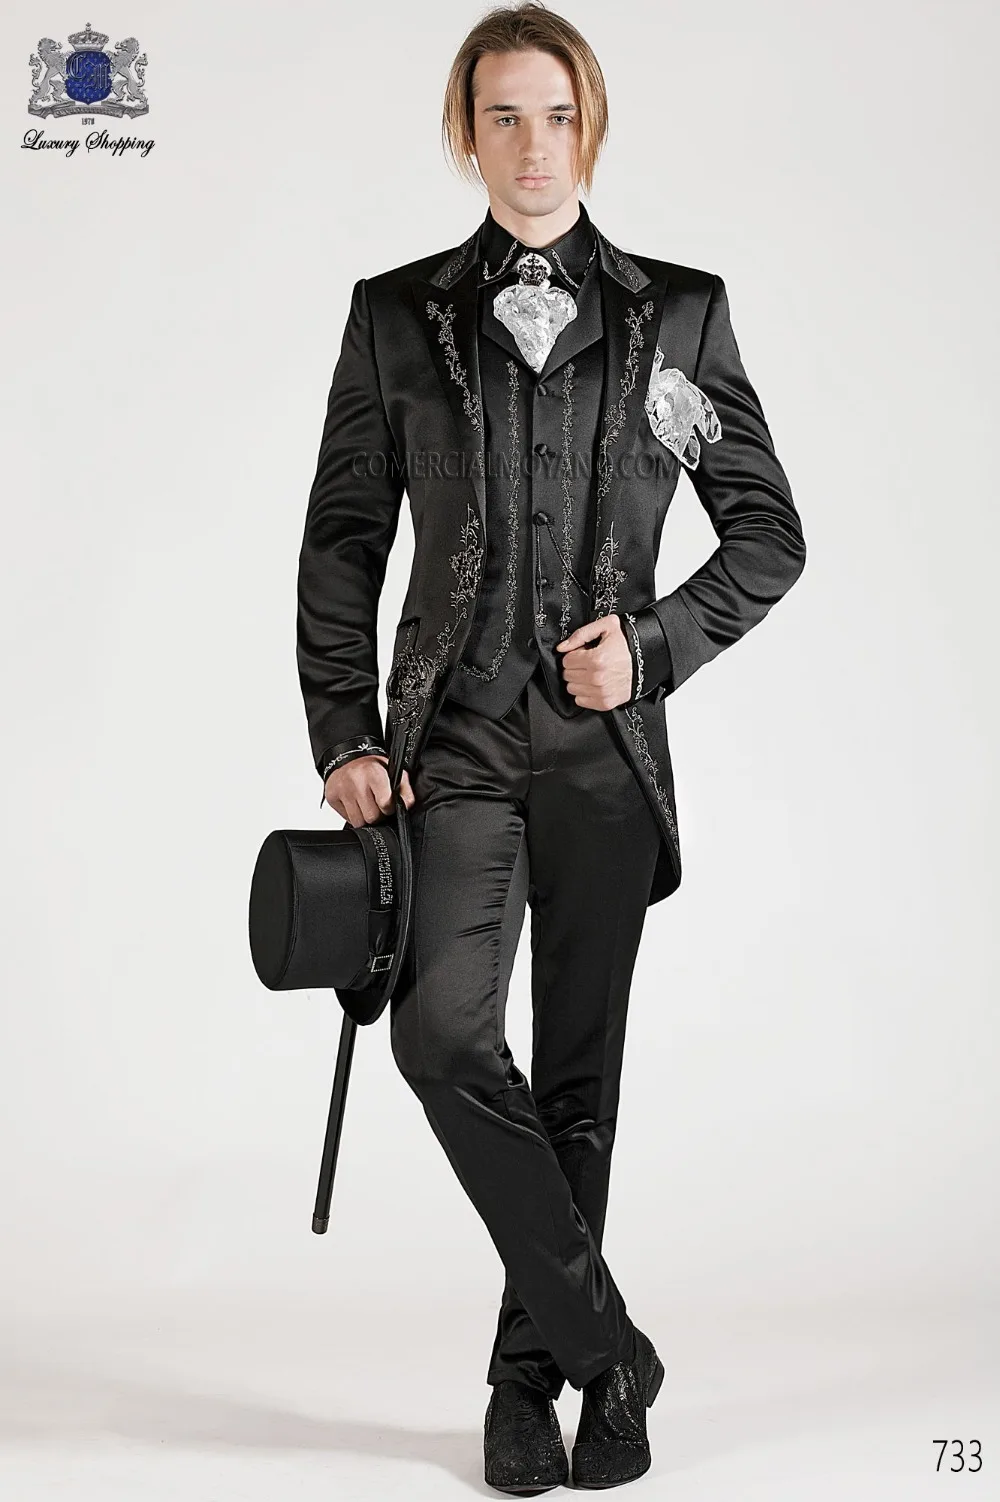 Cheap Suits Black Suits Embroidery Mens Wedding Suits Groom Tuxedo Formal Suits 